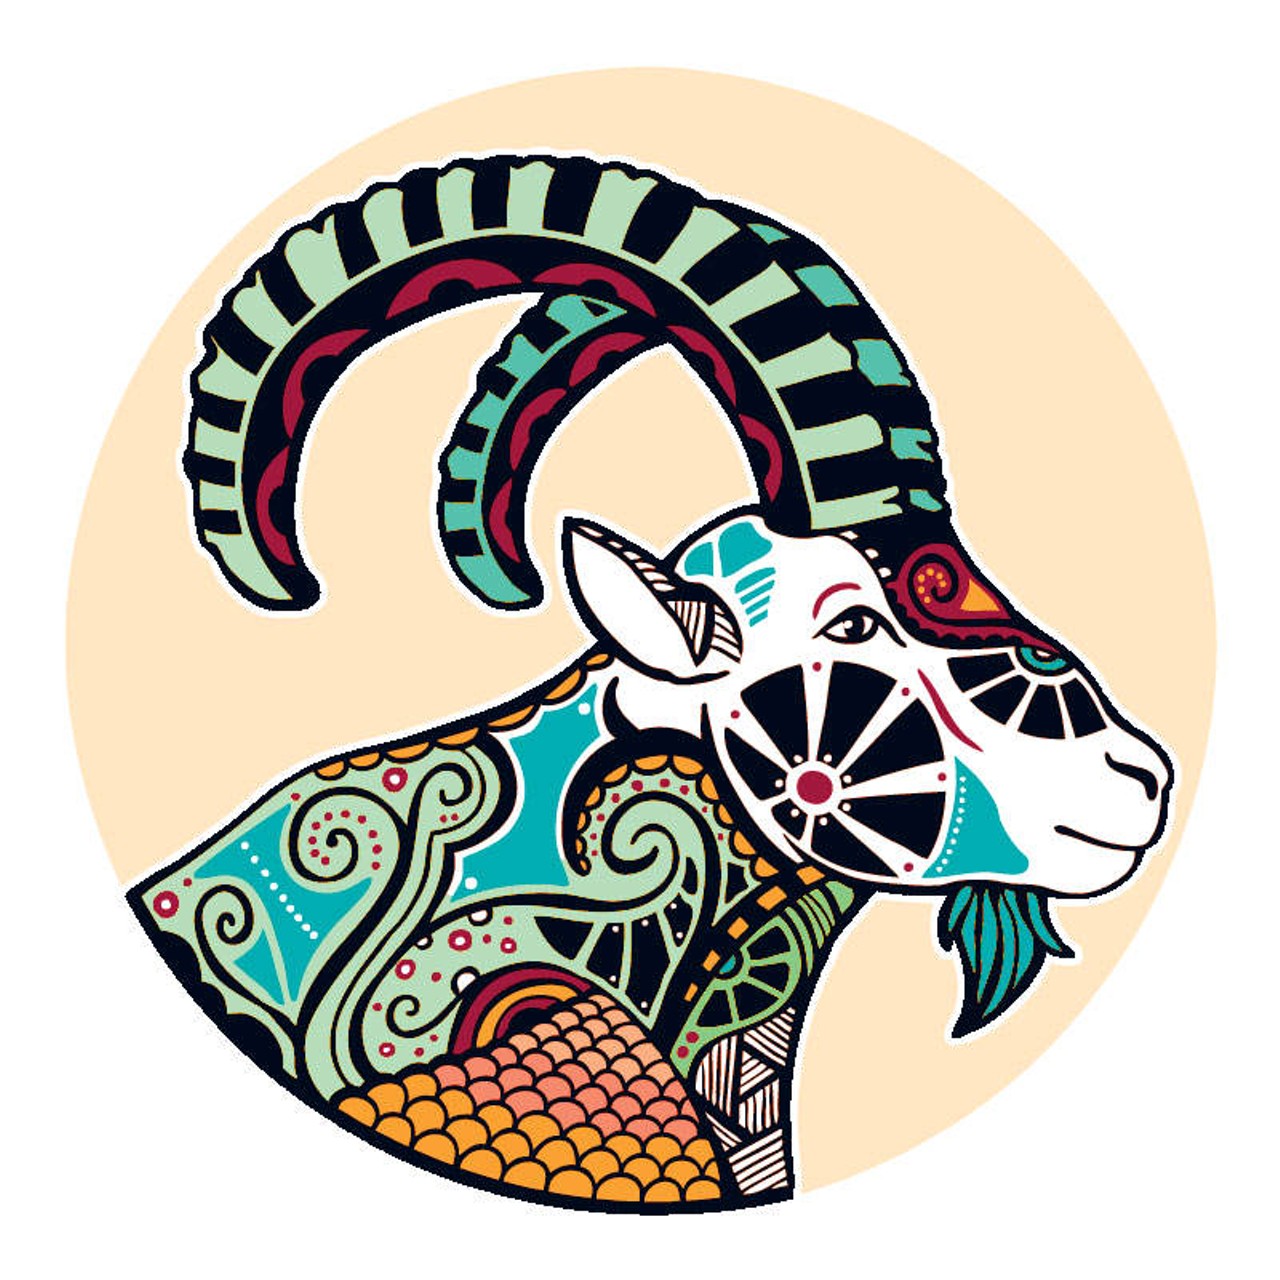 CAPRICORN (Dec. 21-Jan. 20): 
You could be on top of the world. For many of you that concept, and the sense that everything is coming up roses, is totally real. If it is, it&#146;s because you have poured a big dose of the truth, along with your heart and soul, into a relationship or an endeavor that is filled with light and love. Even if you&#146;re not exactly there yet, it&#146;s just a matter of time before everything comes into bloom. The flip side of this image looks like what happens when the castles made of sand reveal themselves to be nothing more than bullshit. Whatever this turns out to be, it&#146;ll be do-or-die within three months.